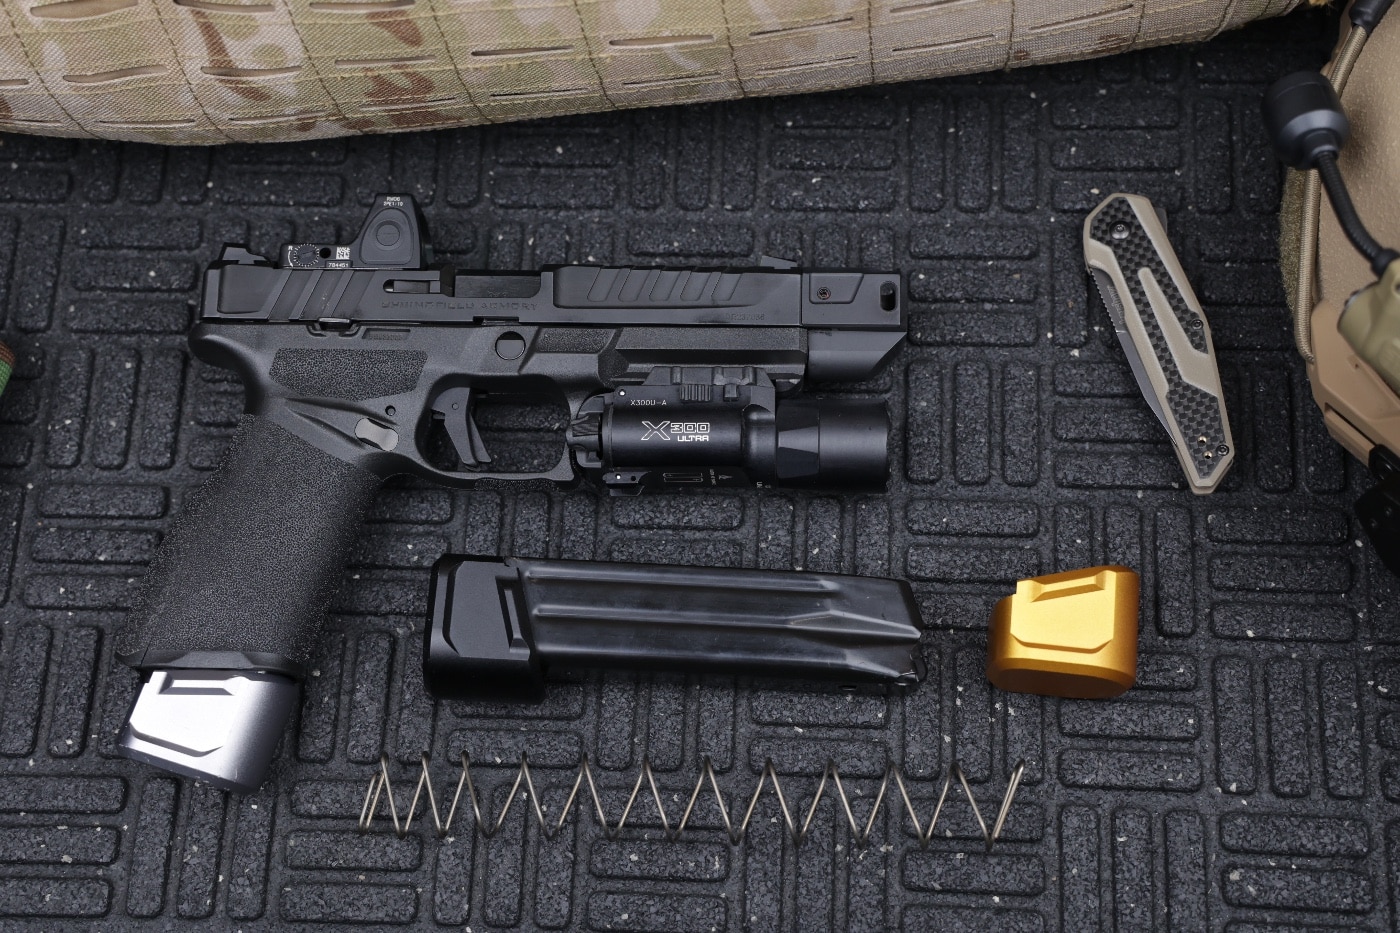 Shown here are the Tyrant CNC upgrade parts for Springfield Echelon firearm. This 9mm pistol is a semi-automatic handgun designed to cire centerfire cartridges from a detachable magazine. A red dot optic and a flashlight are also mounted on the gun for self-defense use and CCW.